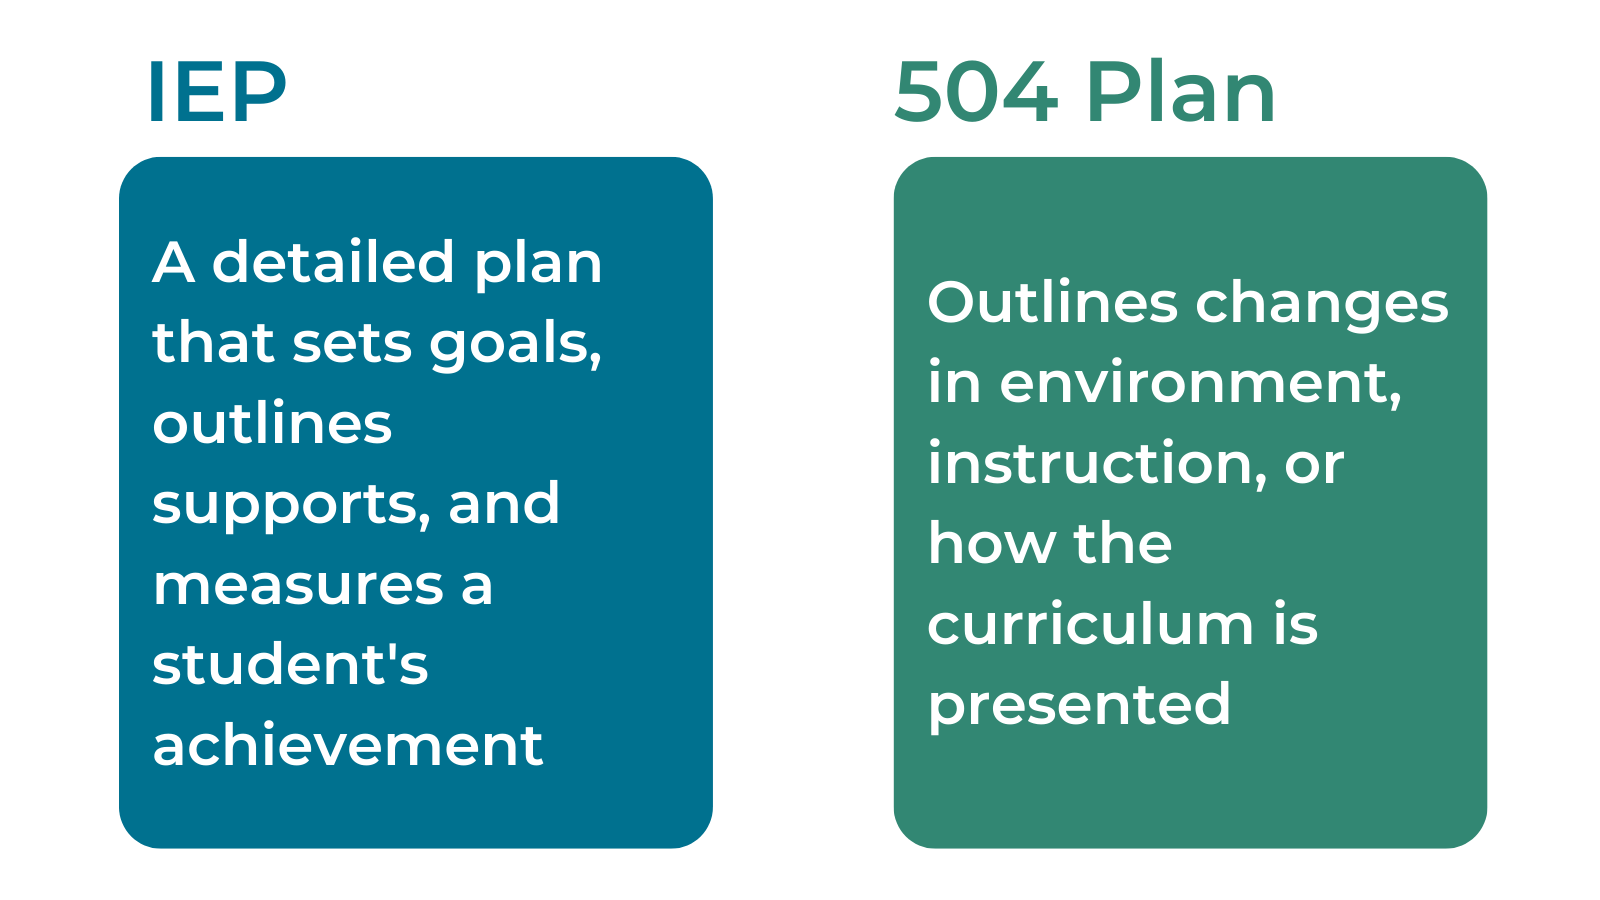 IEP: A detailed plan that sets goals, outlines supports, and measures a student's achievement

504 Plan: Outlines changes in environment, instruction, or how the curriculum is presented